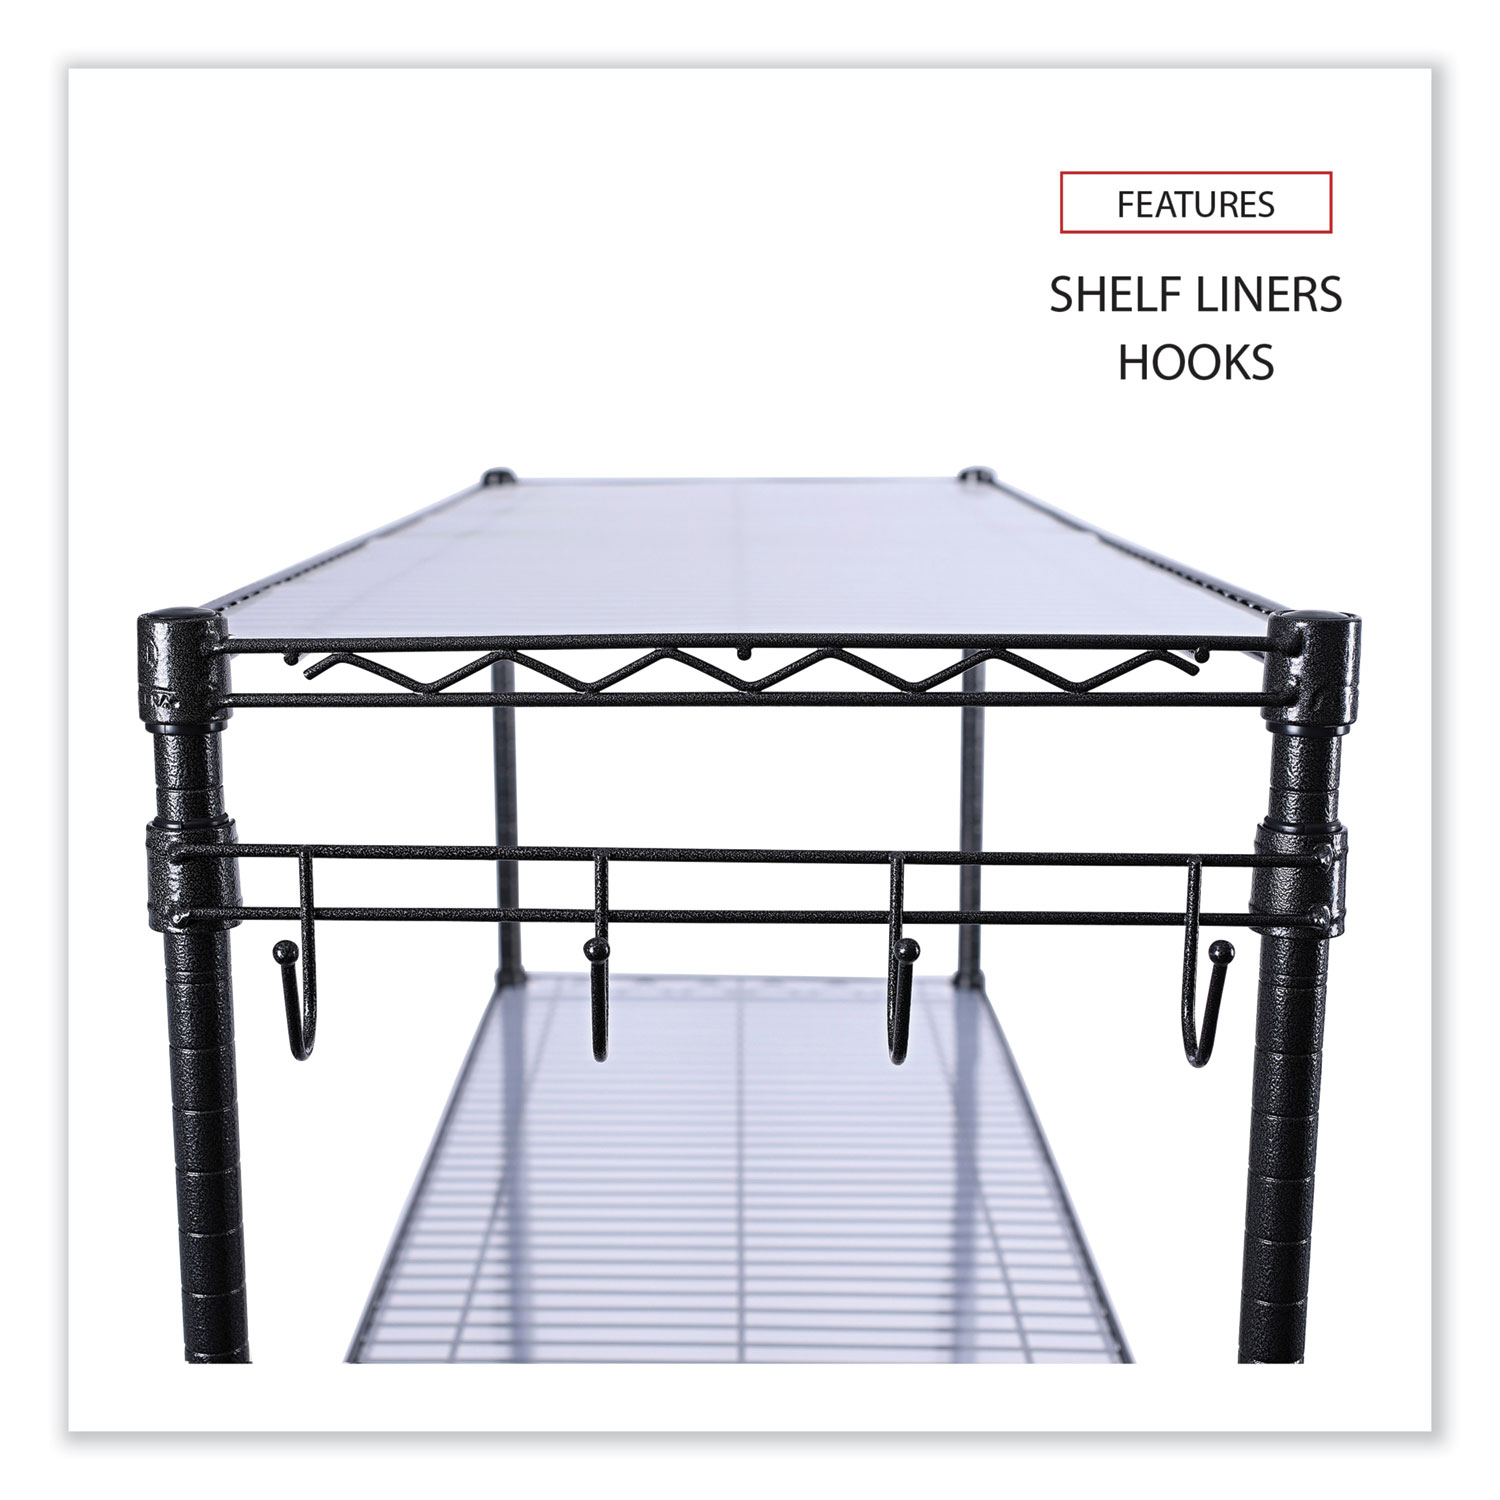 5-Shelf Wire Shelving Kit with Casters and Shelf Liners, 36w x 18d